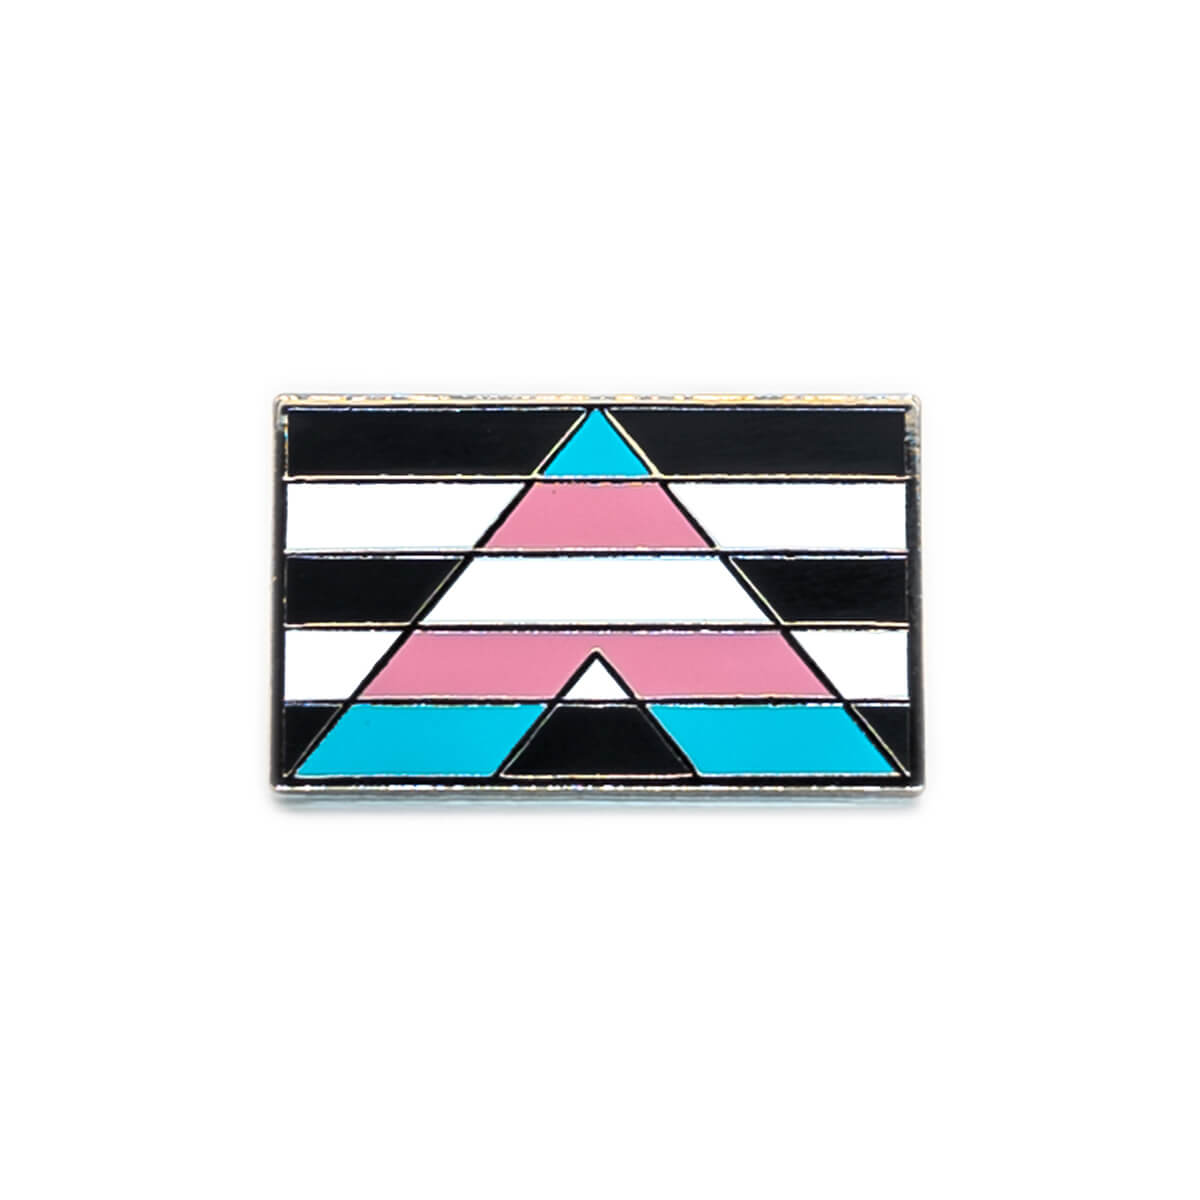 An image of a transgender ally flag pin